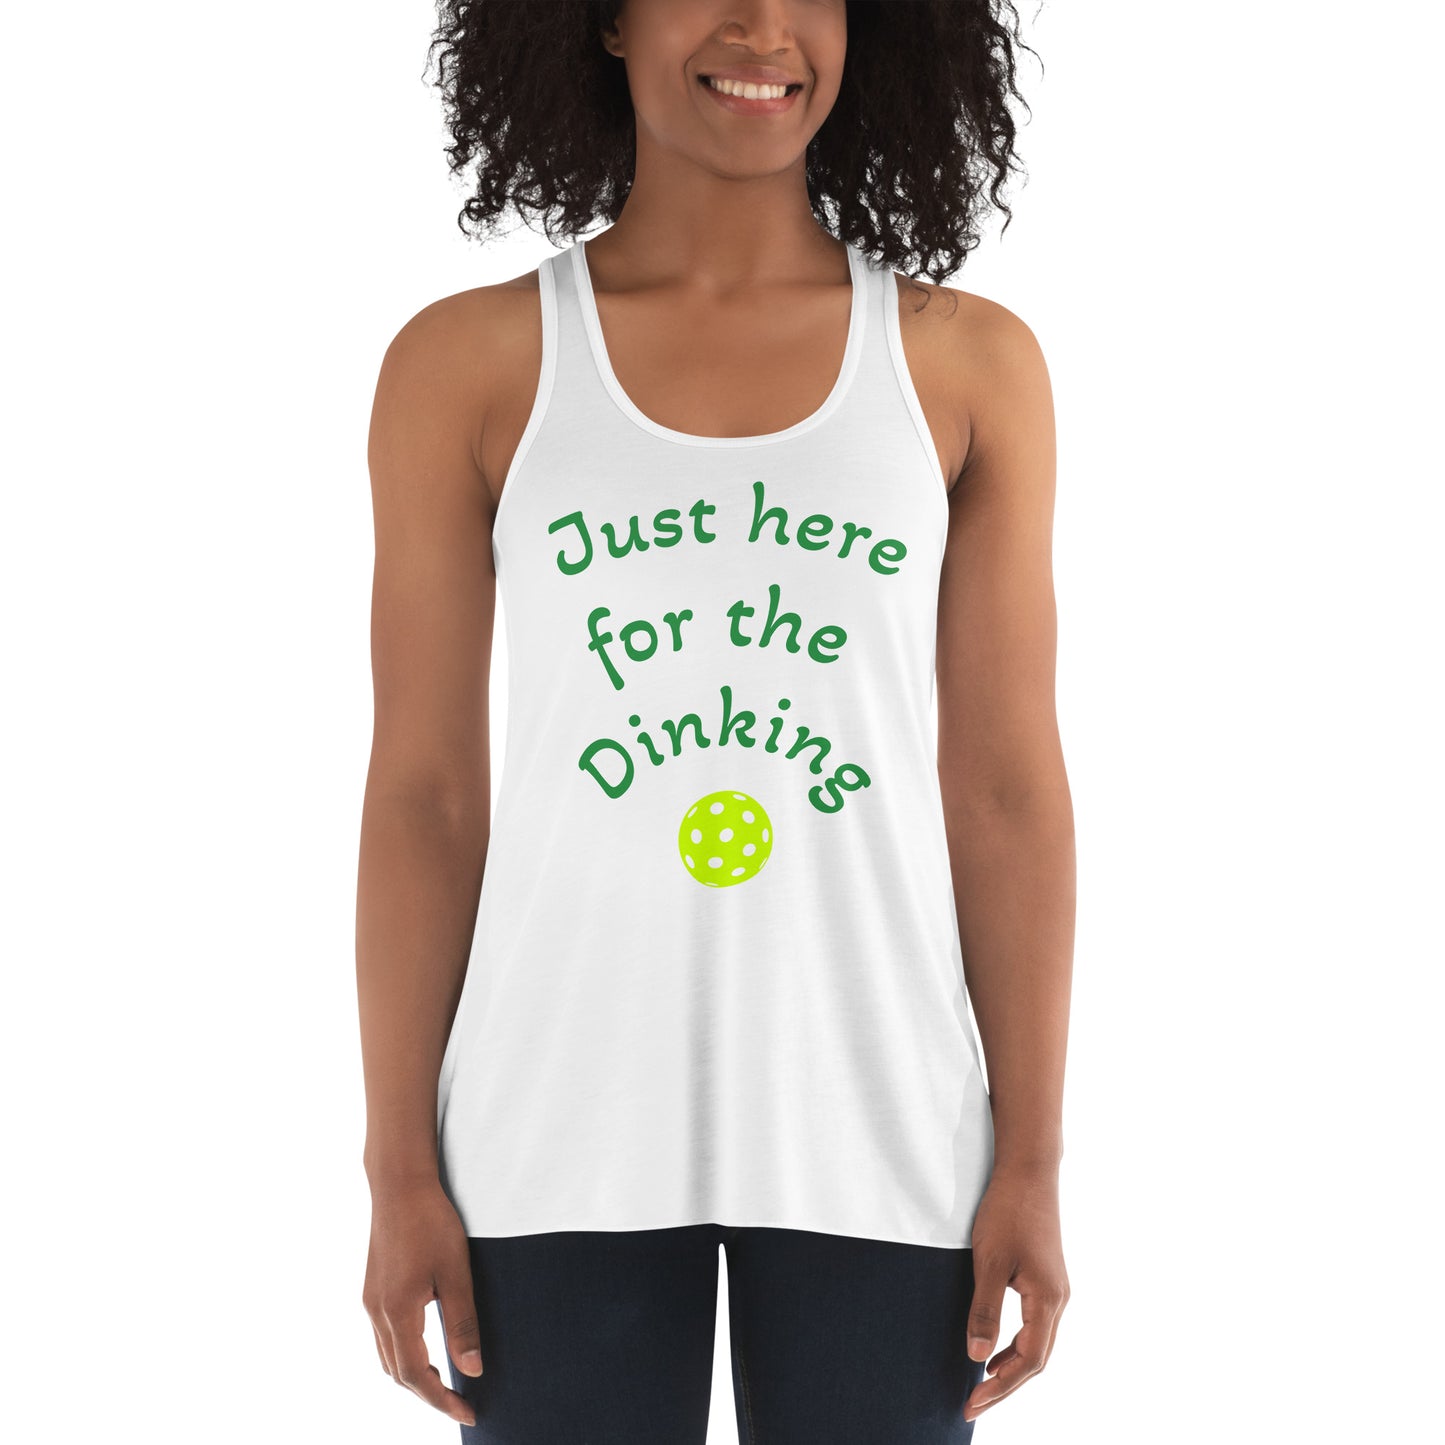 Just here for the Dinking - Women's Flowy Racerback Tank